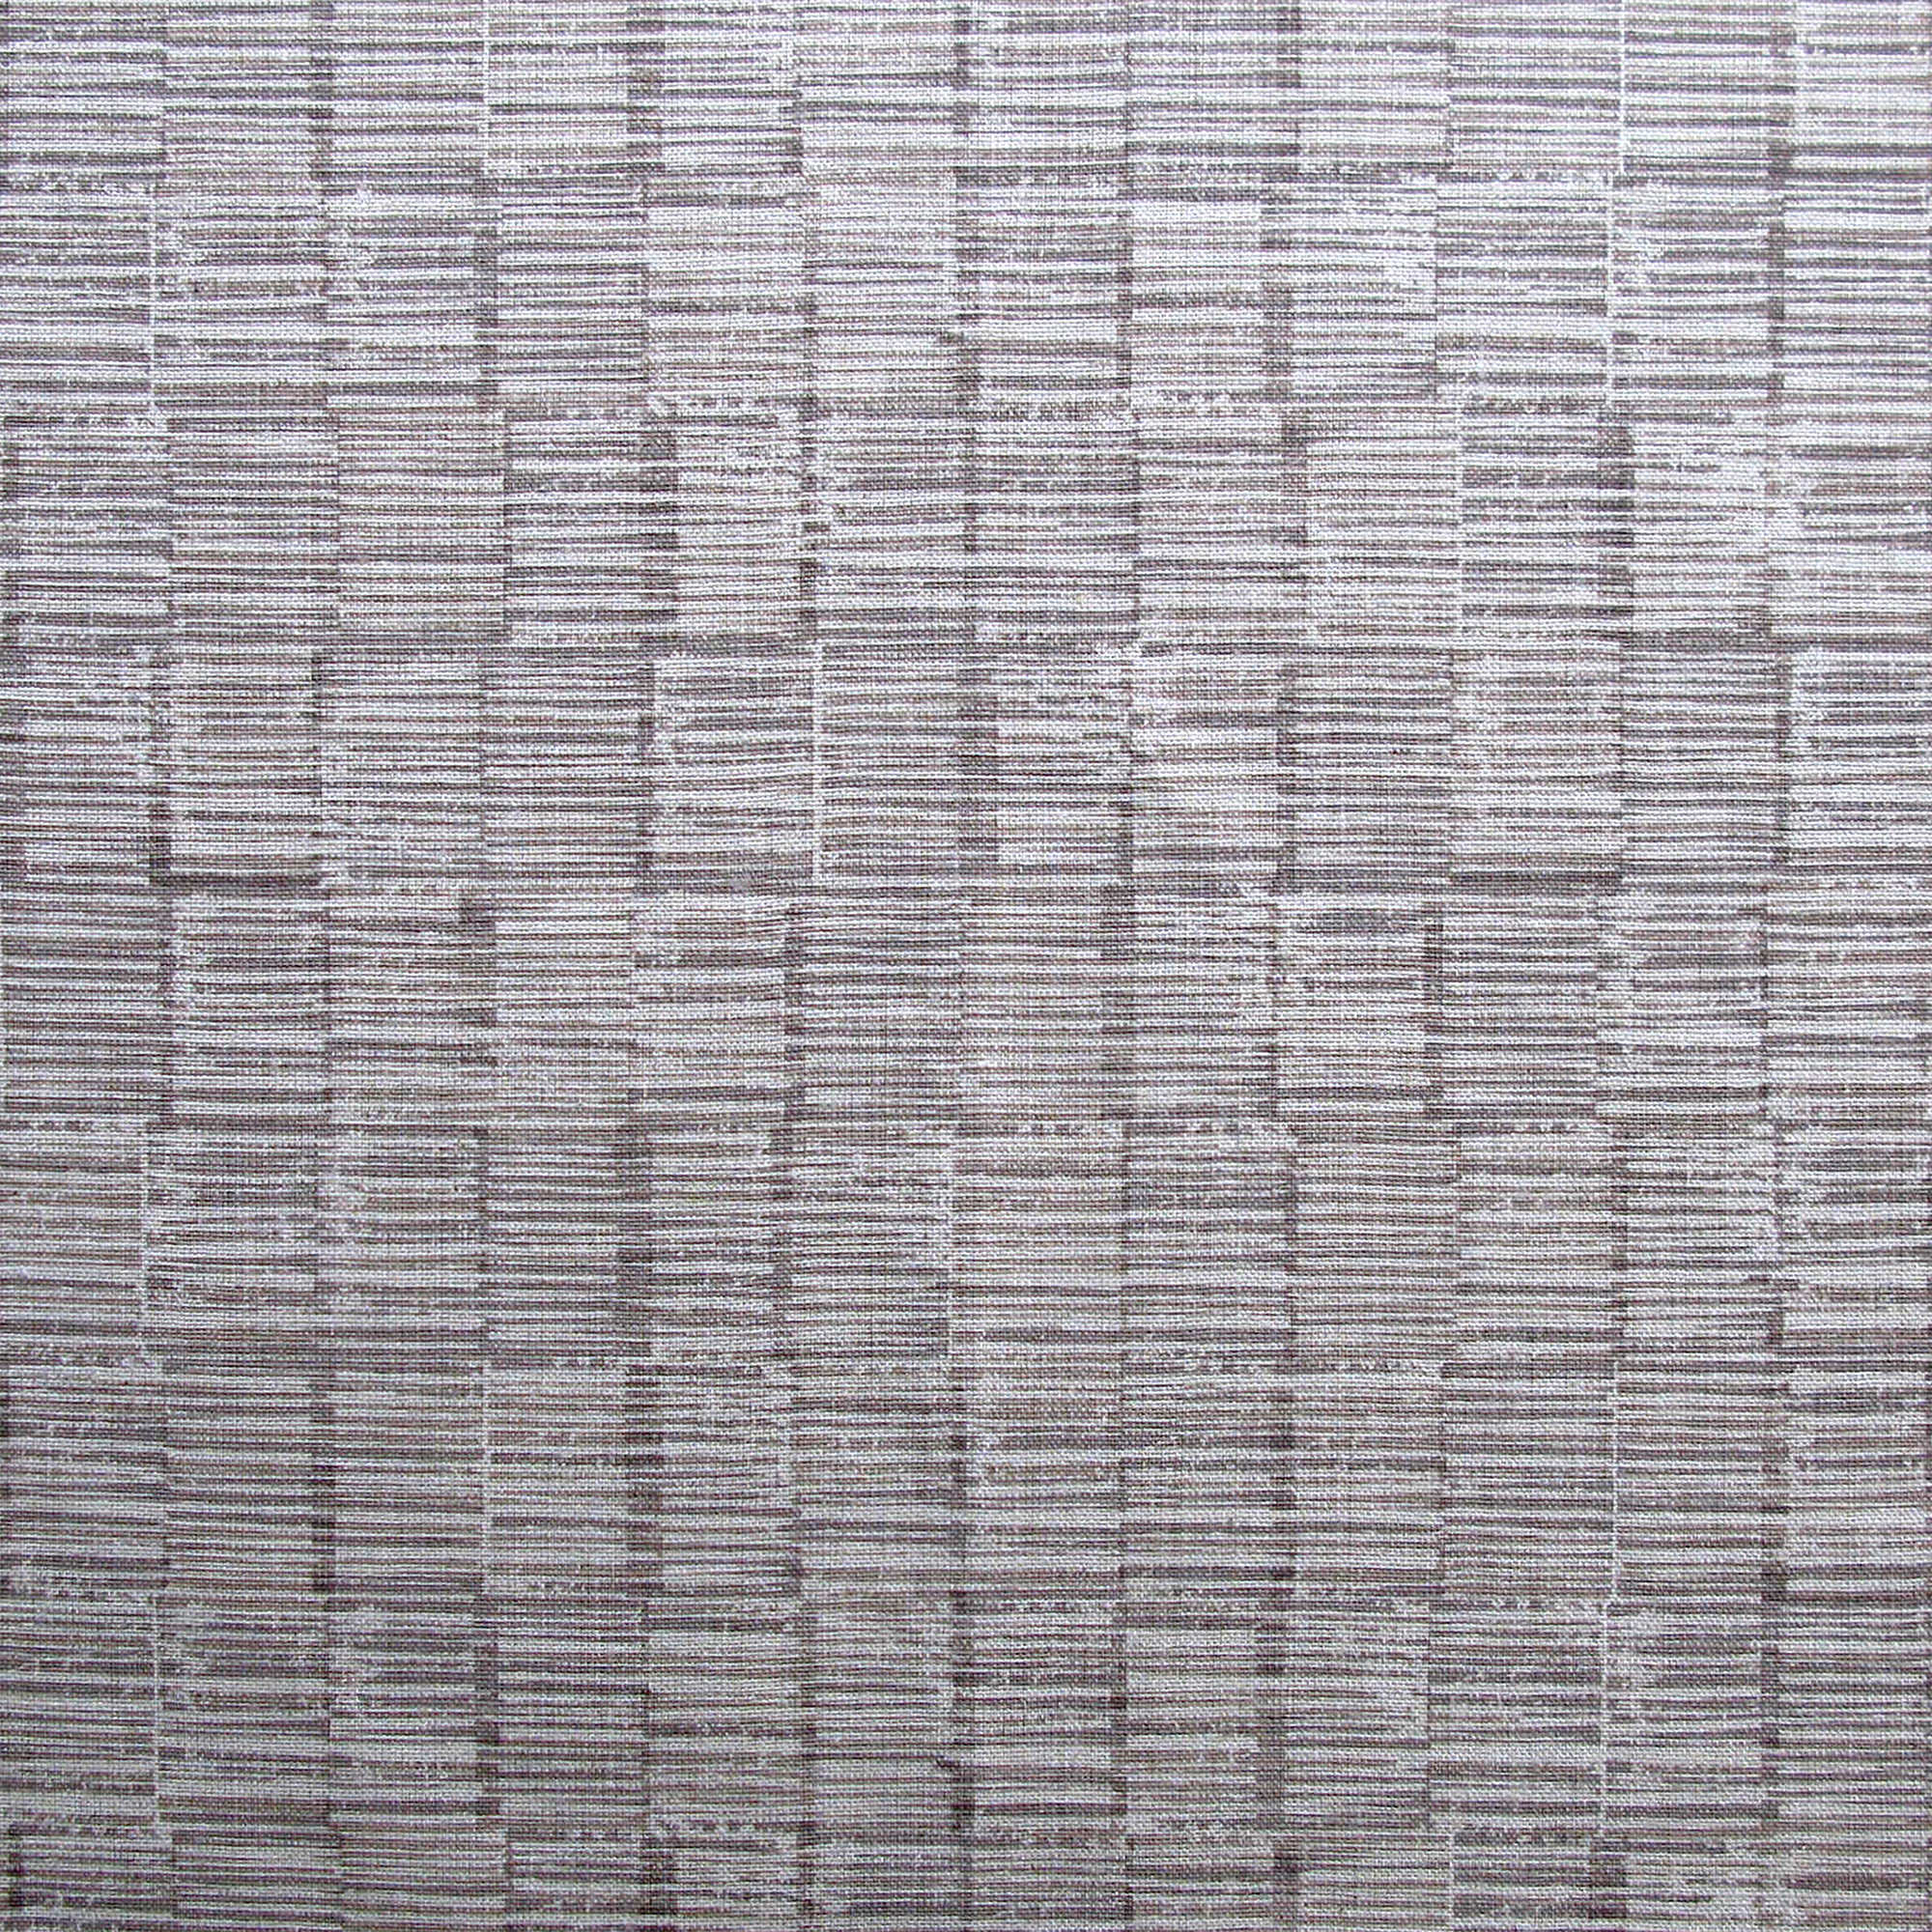 Detail of fabric in a textural grid print in gray on a light gray field.